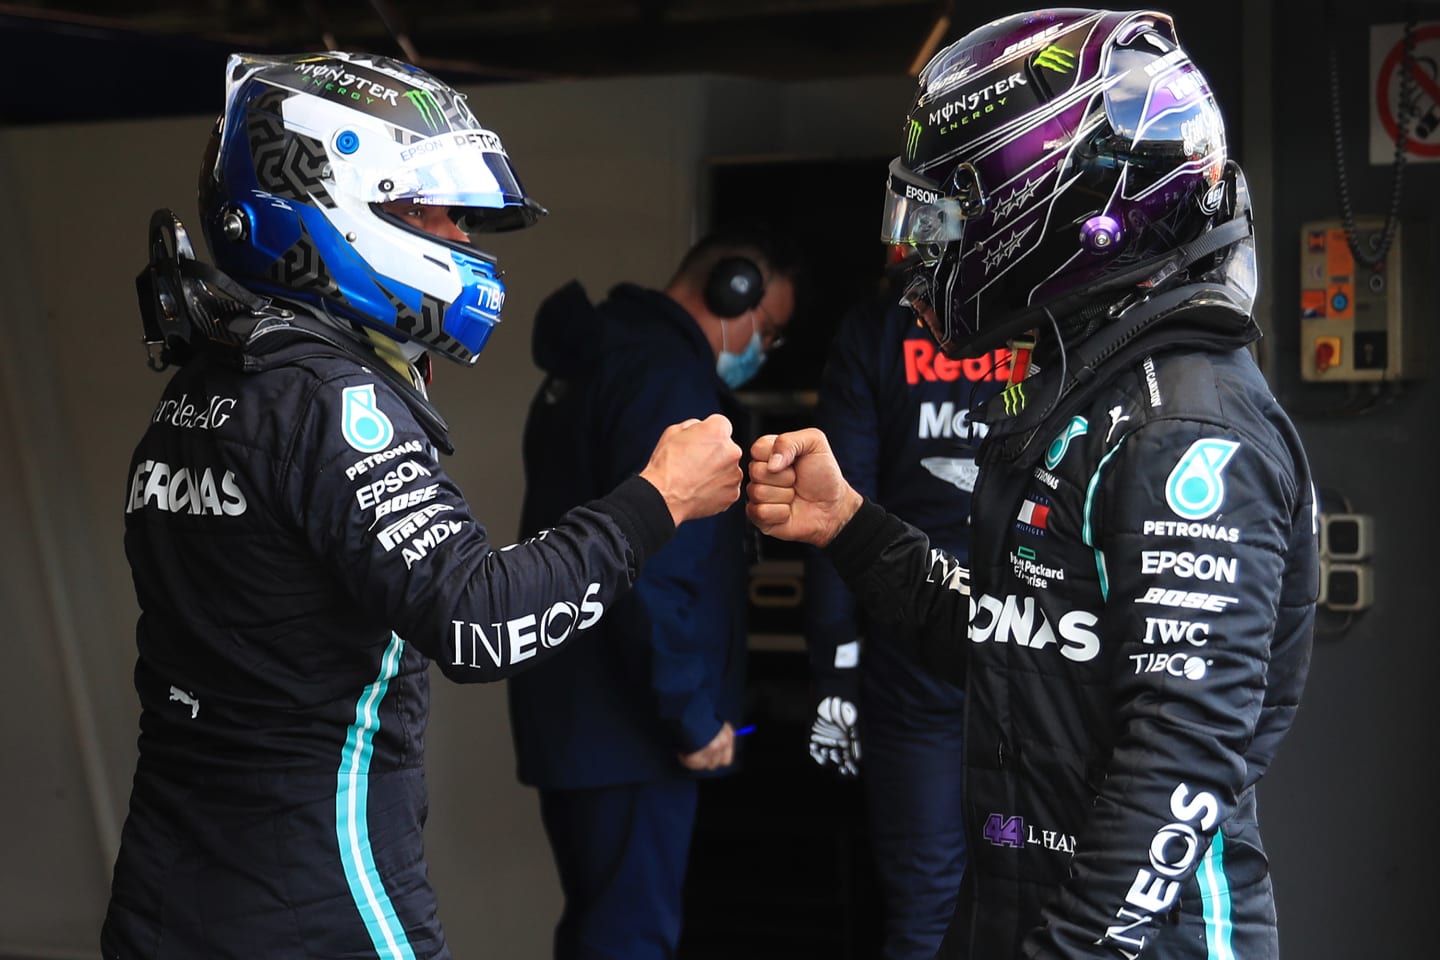 NUERBURG, GERMANY - OCTOBER 10: Second placed qualifier Lewis Hamilton of Great Britain and Mercedes GP and pole position qualifier Valtteri Bottas of Finland and Mercedes GP embrace in parc ferme during qualifying ahead of the F1 Eifel Grand Prix at Nuerburgring on October 10, 2020 in Nuerburg, Germany. (Photo by Wolfgang Rattay - Pool/Getty Images)